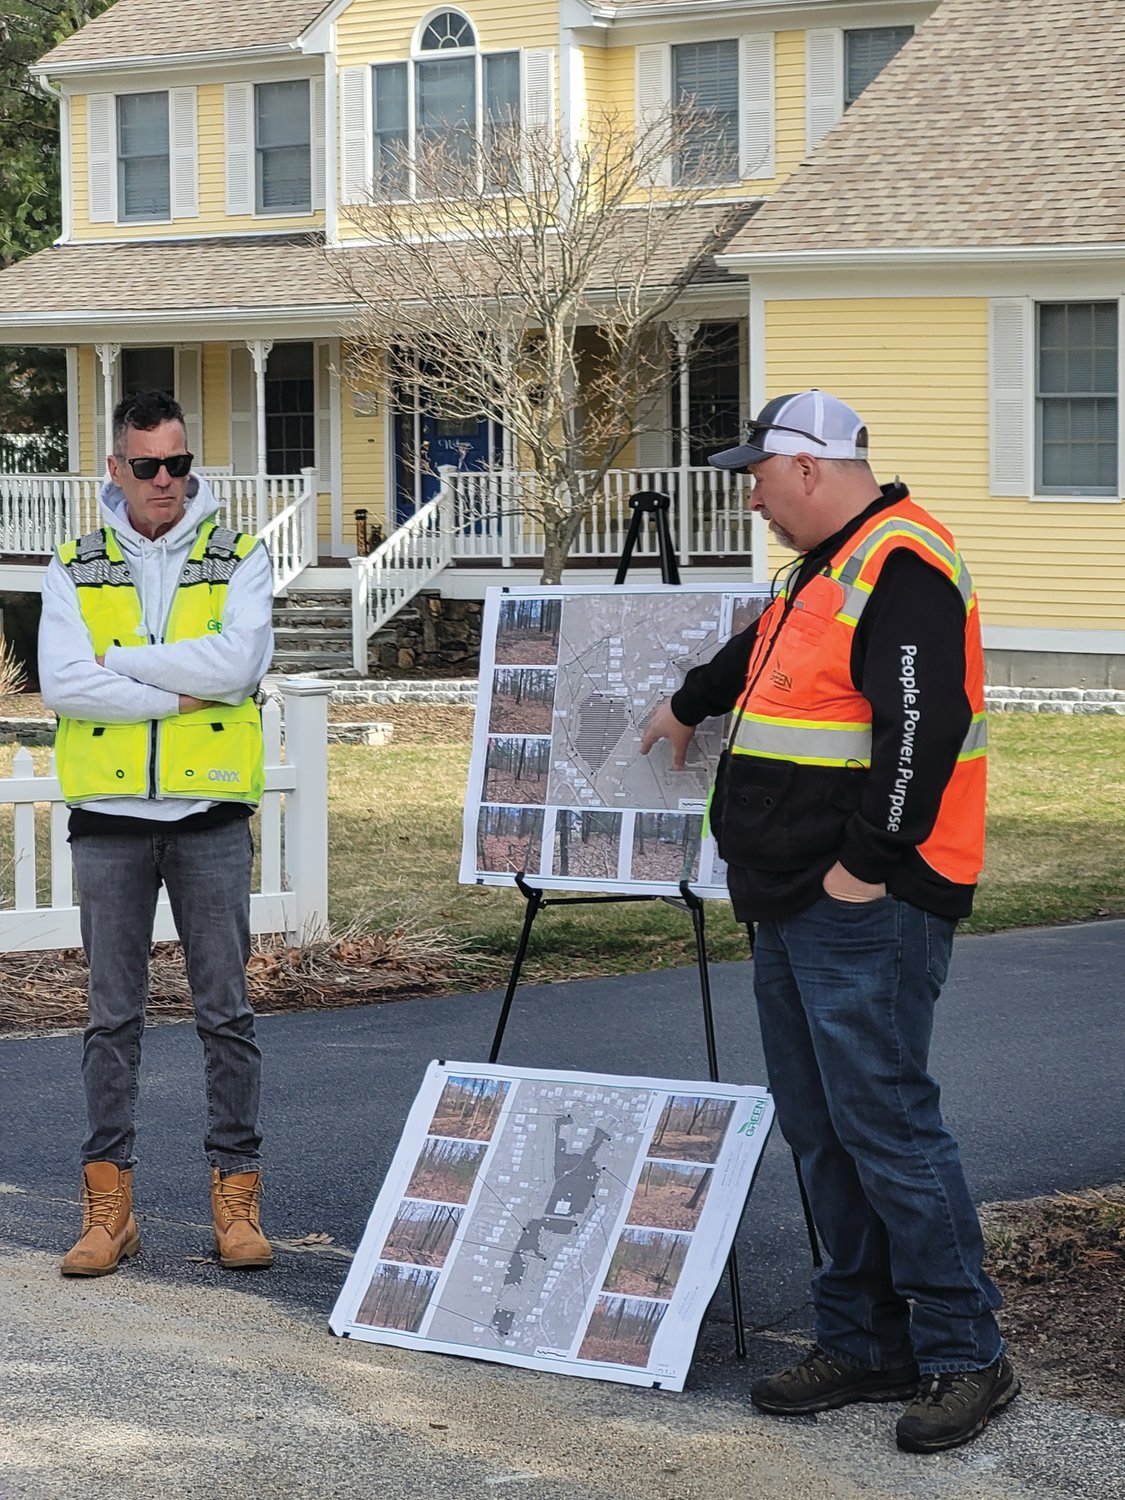 SITE TOUR: Green Development’s Kevin Morin, Director of Engineering & Project Development, and John McCauley, Director of Sales, gave interested residents a tour through the woodlands the firm plans to develop into five solar fields if the town gives its approval.